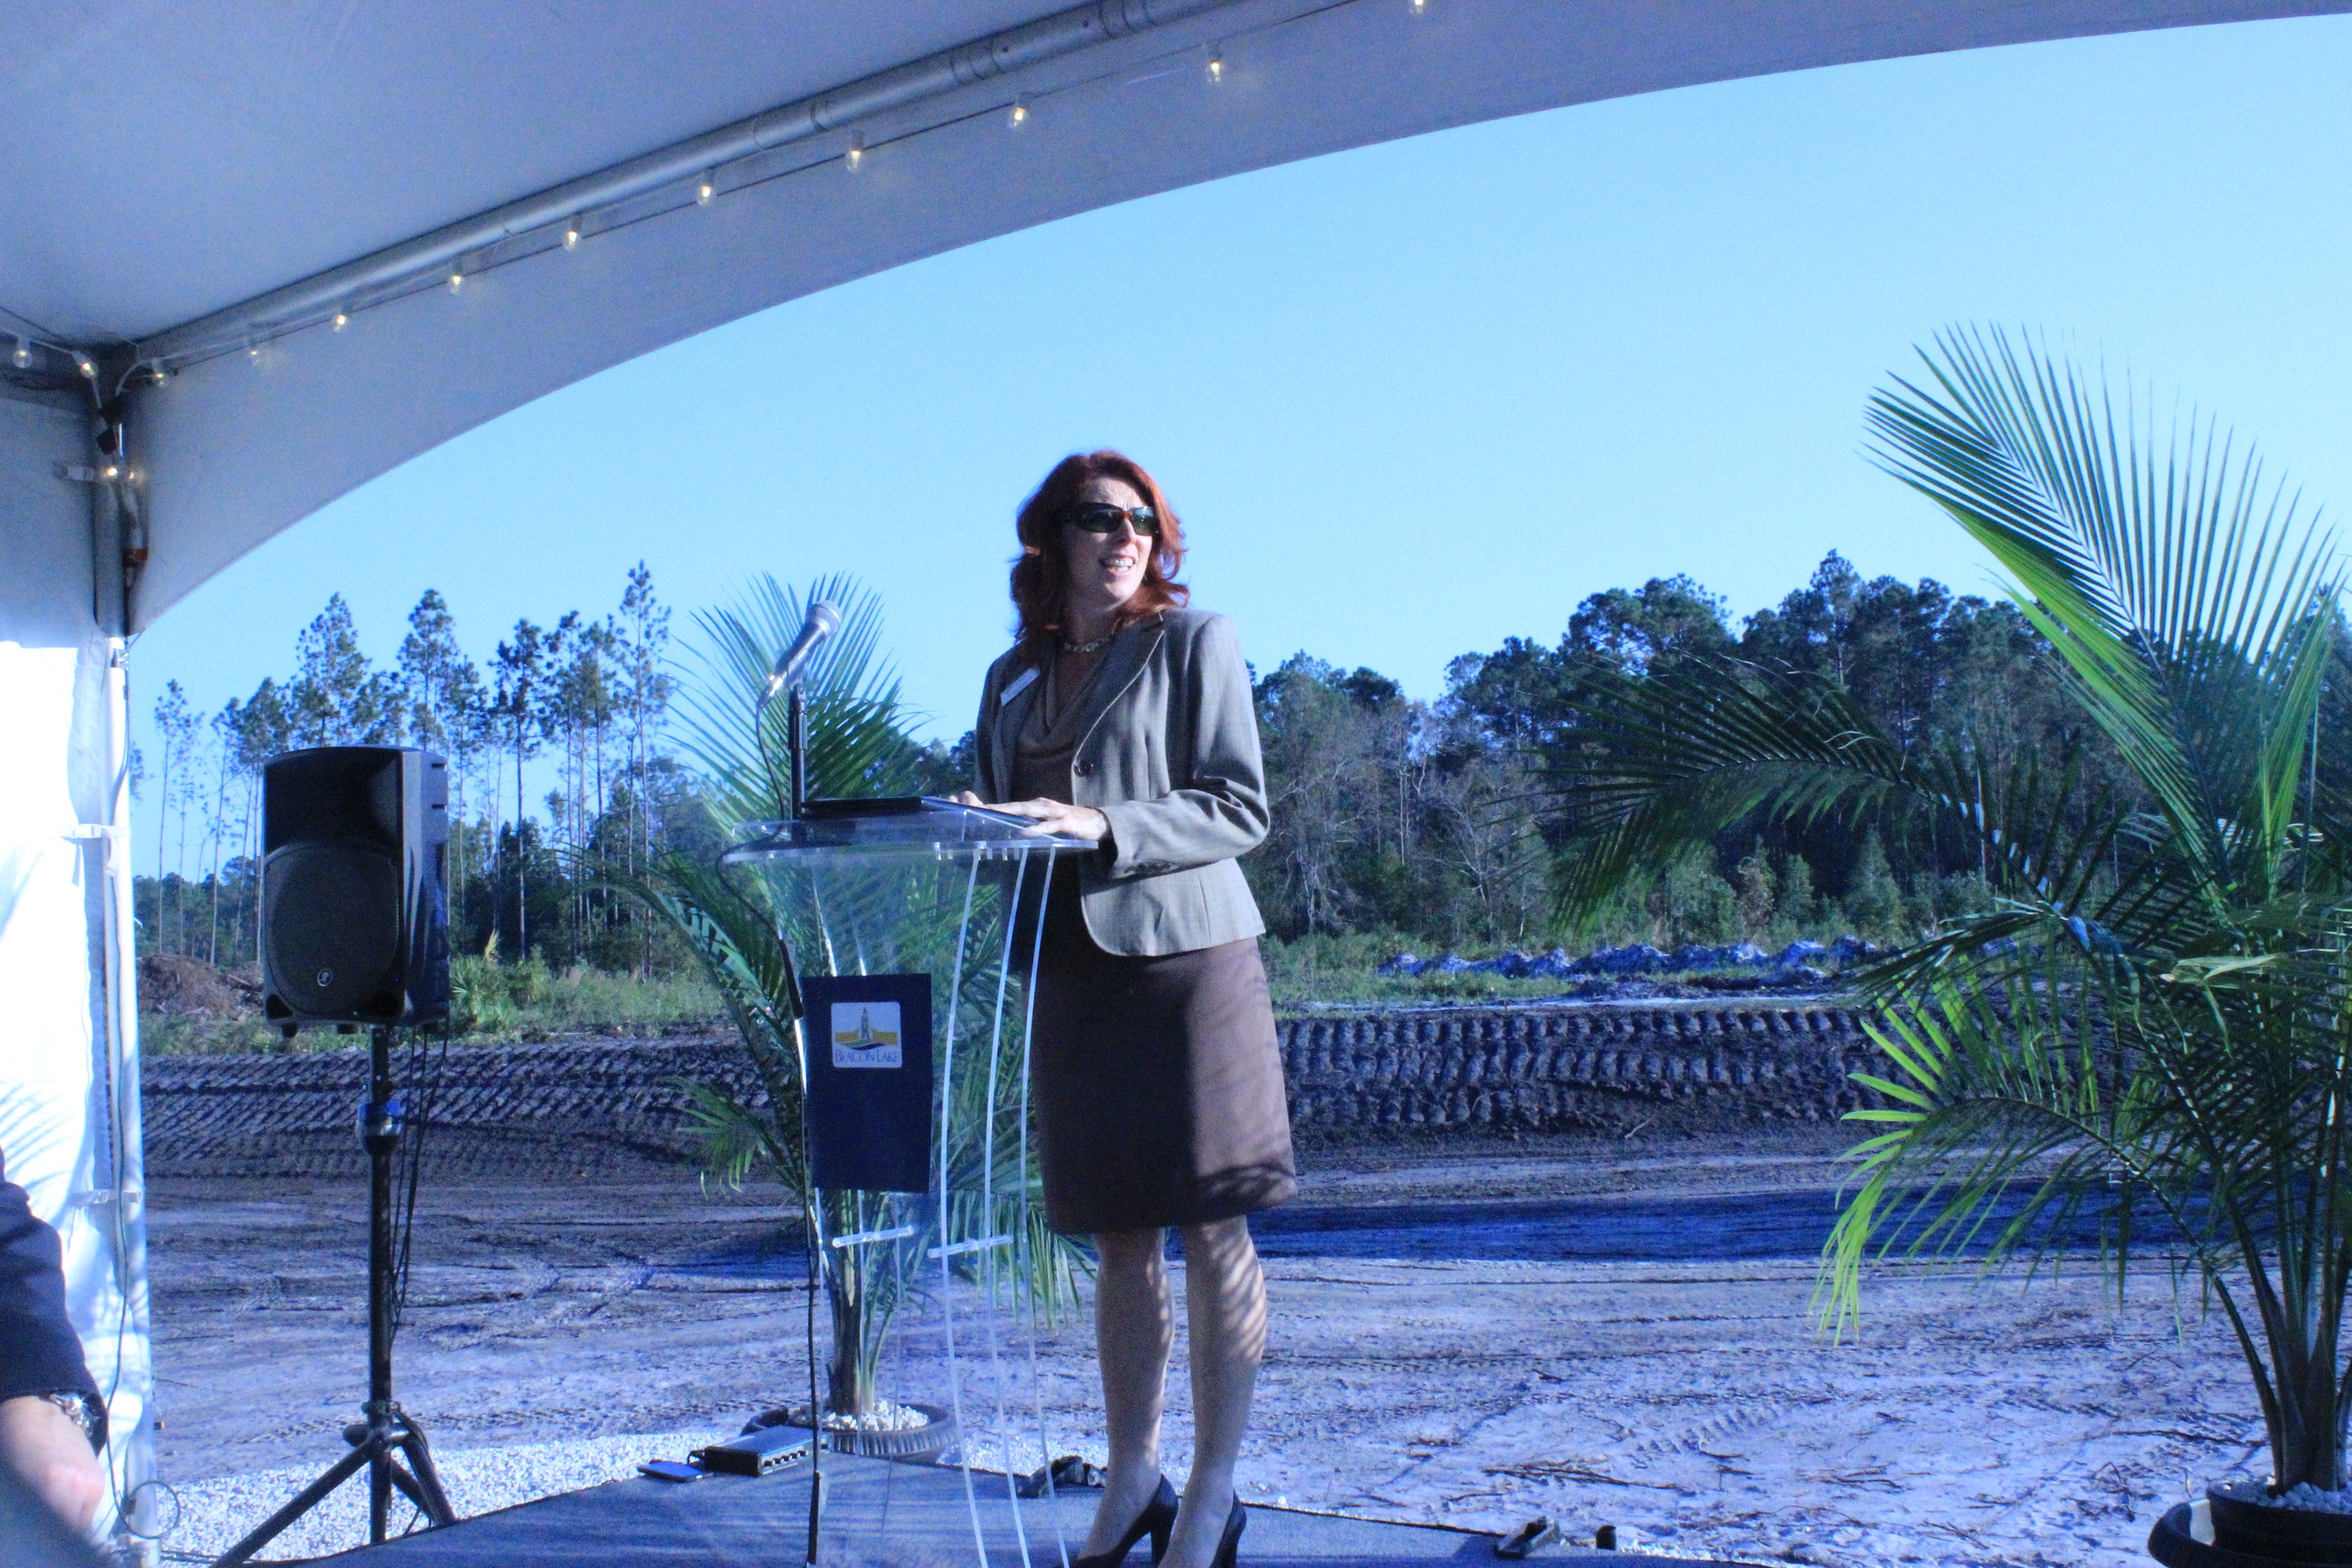 Cathy Johnston, St. Johns County Chamber of Commerce board chair, speaks at the Beacon Lake groundbreaking event.